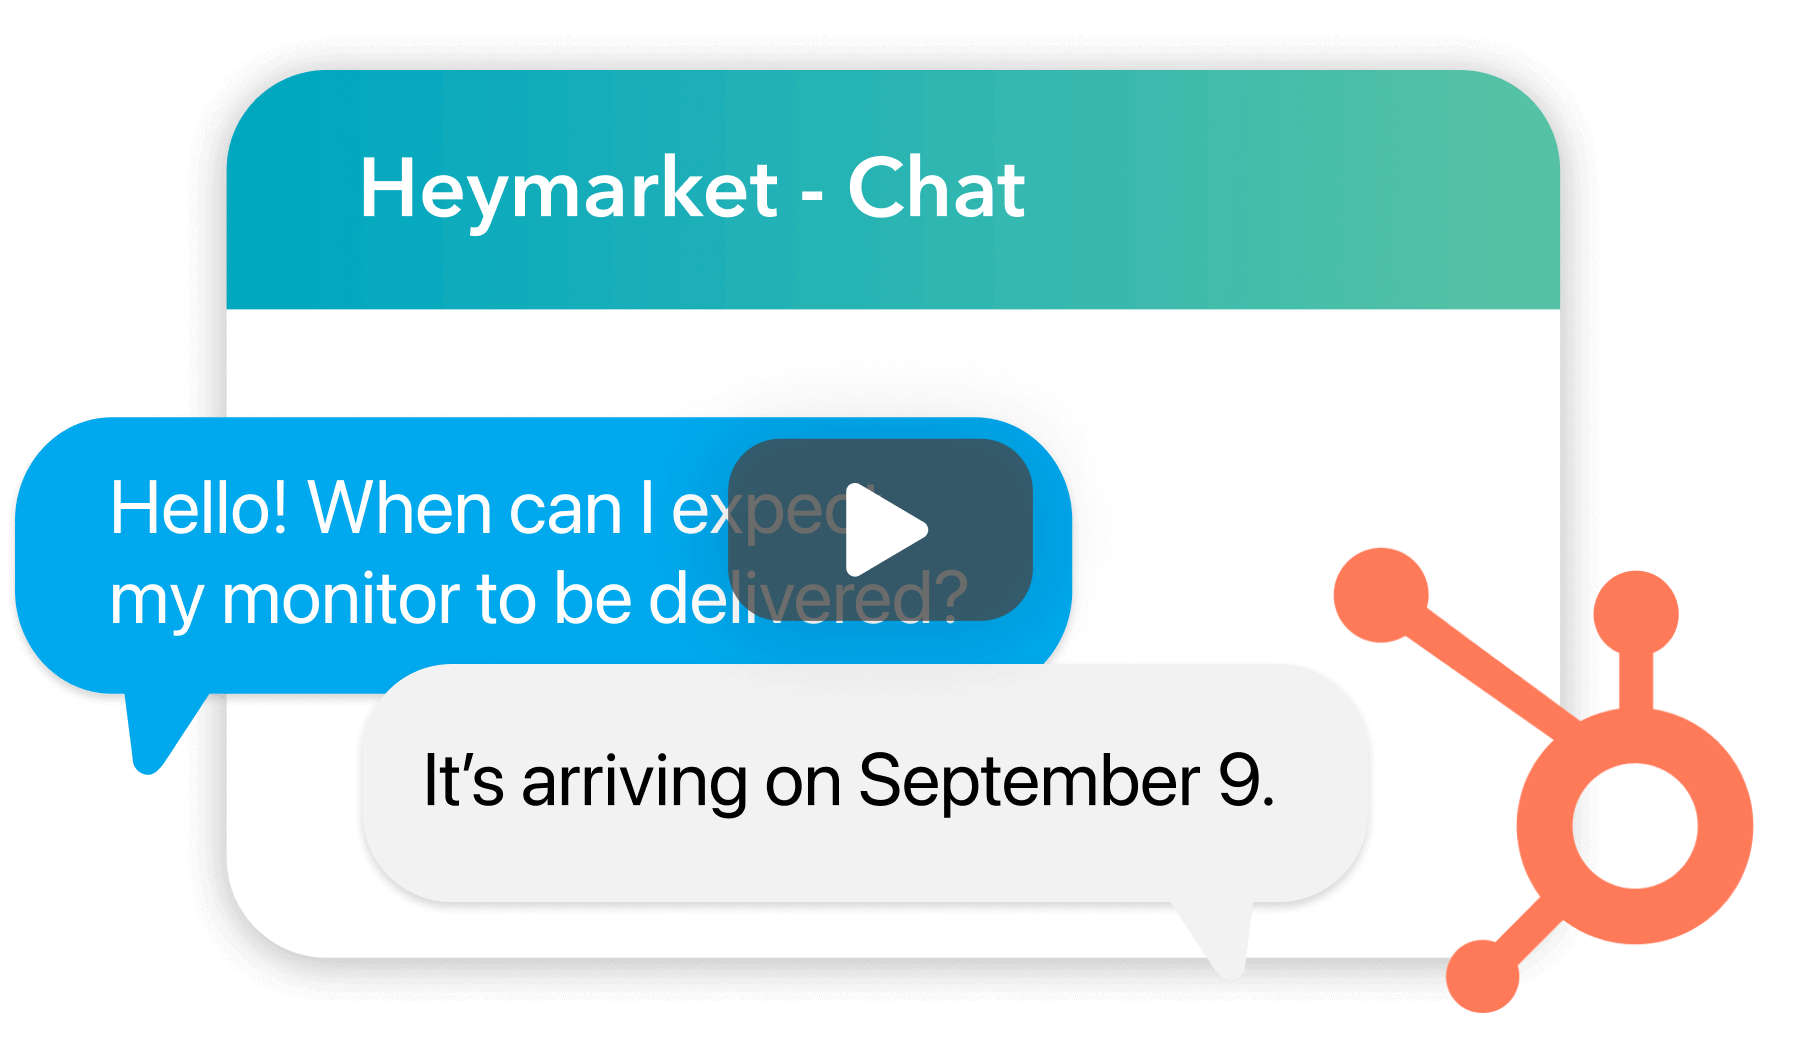 Heymarket chat window in HubSpot with yellow and black play button overlaid on top